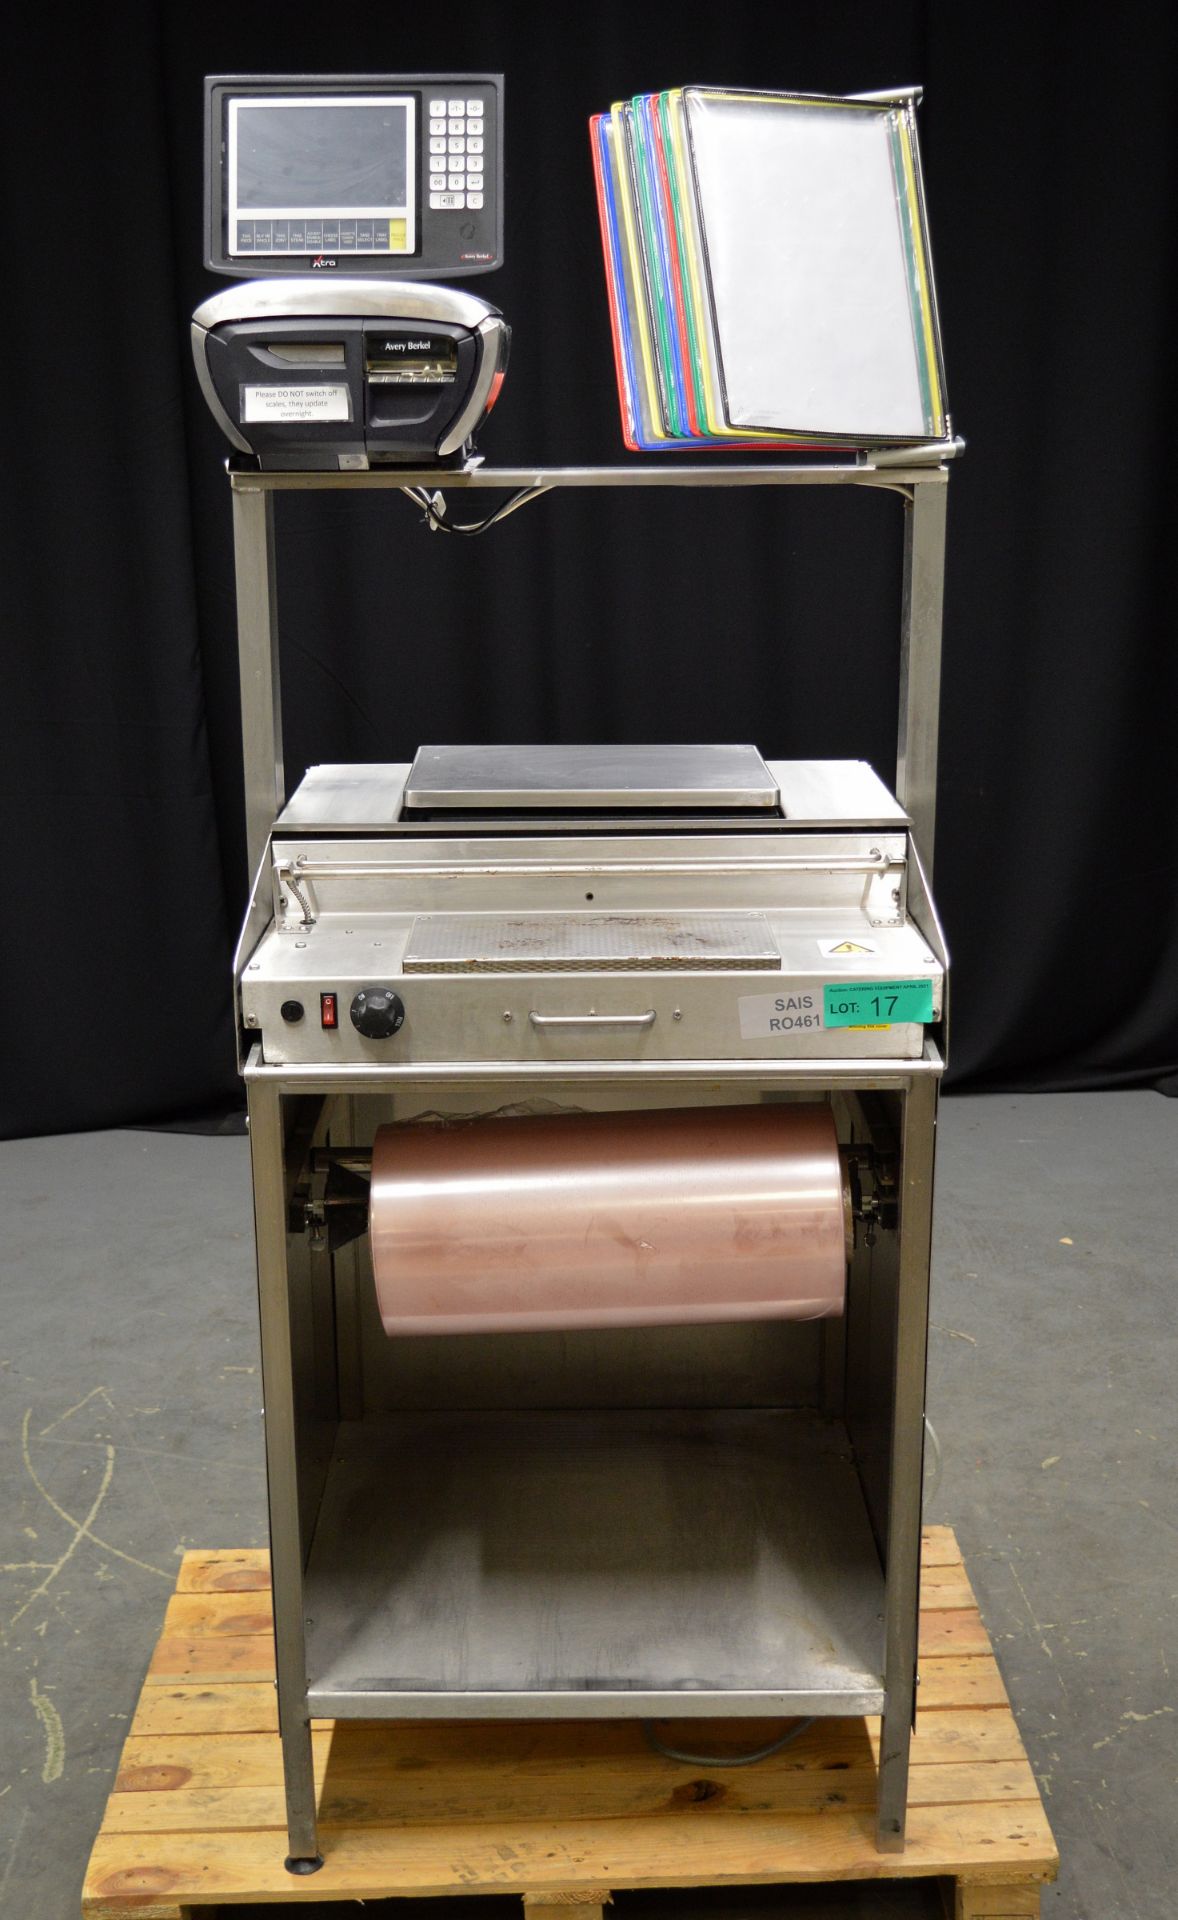 Avery Berkel WWS3 Label and Receipt Printing Scales with Shrink Wrapping Machine